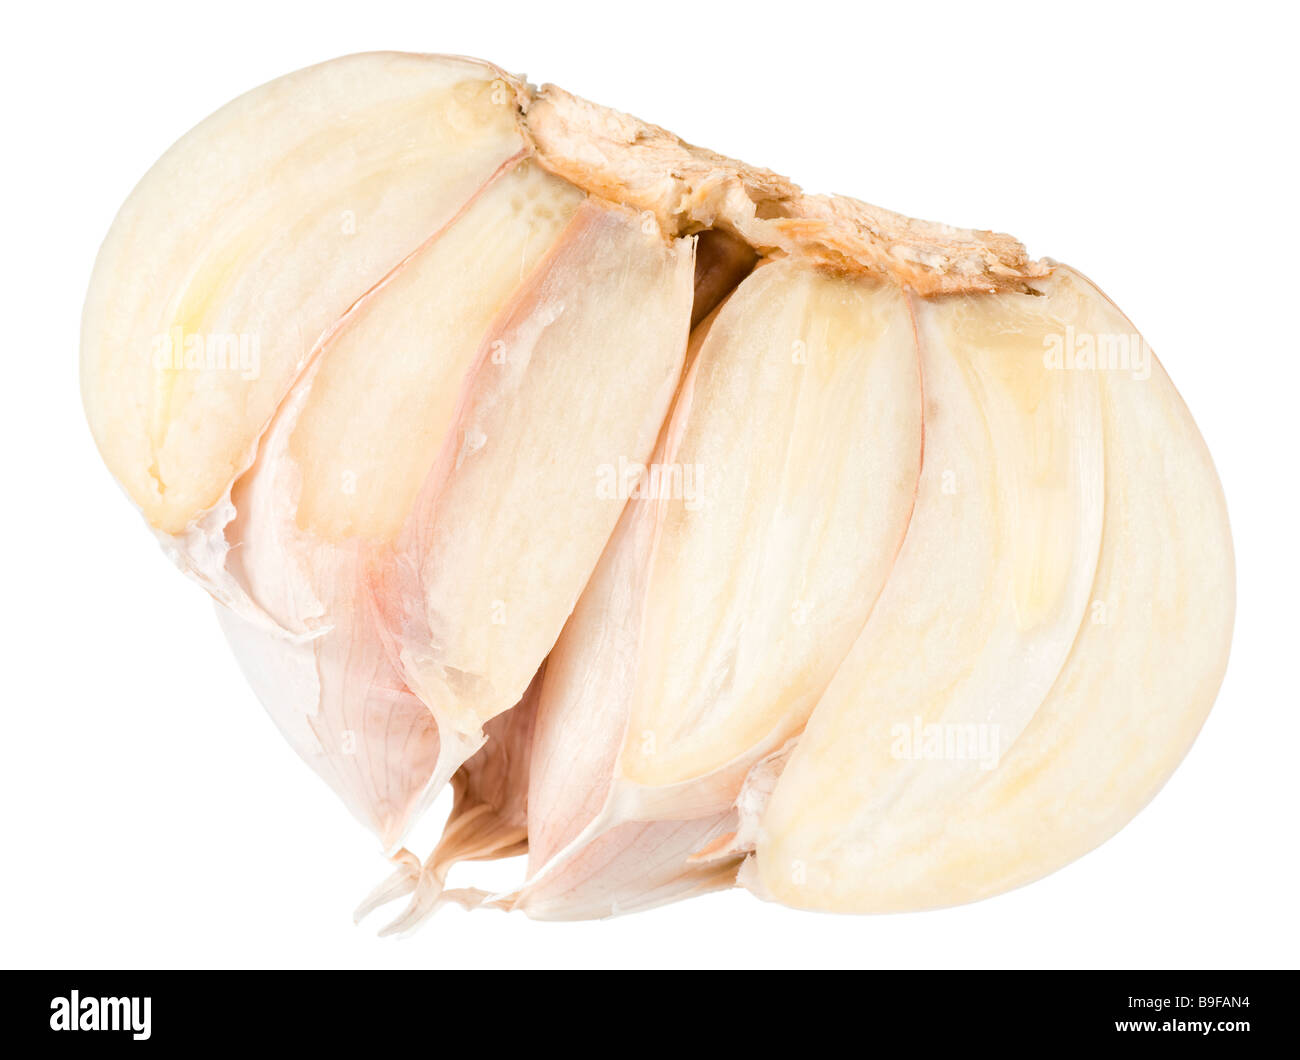 vitamin split garlic bulb isolated on white background (with path) Stock Photo